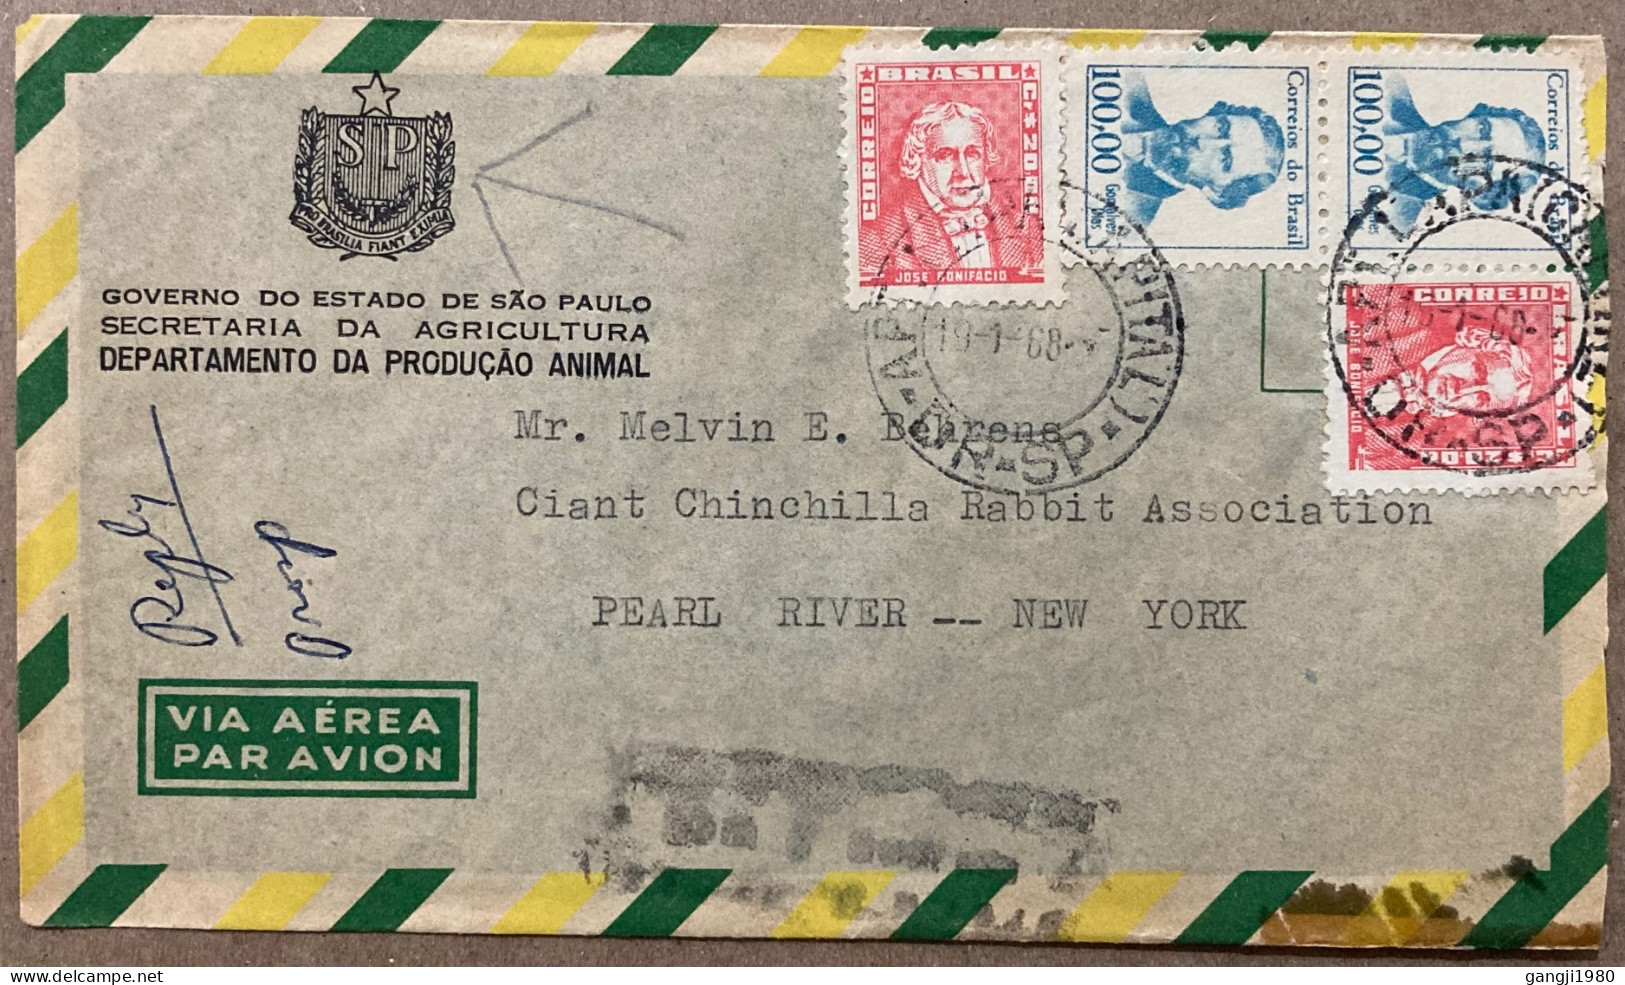 BRAZIL1968, COVER USED TO USA, ADVERTISING COVER, AGRICULTURE MINISTRY, ANIMAL & RABBIT BREEDER, IMPORT- EXPORT, ENCLOSE - Cartas & Documentos